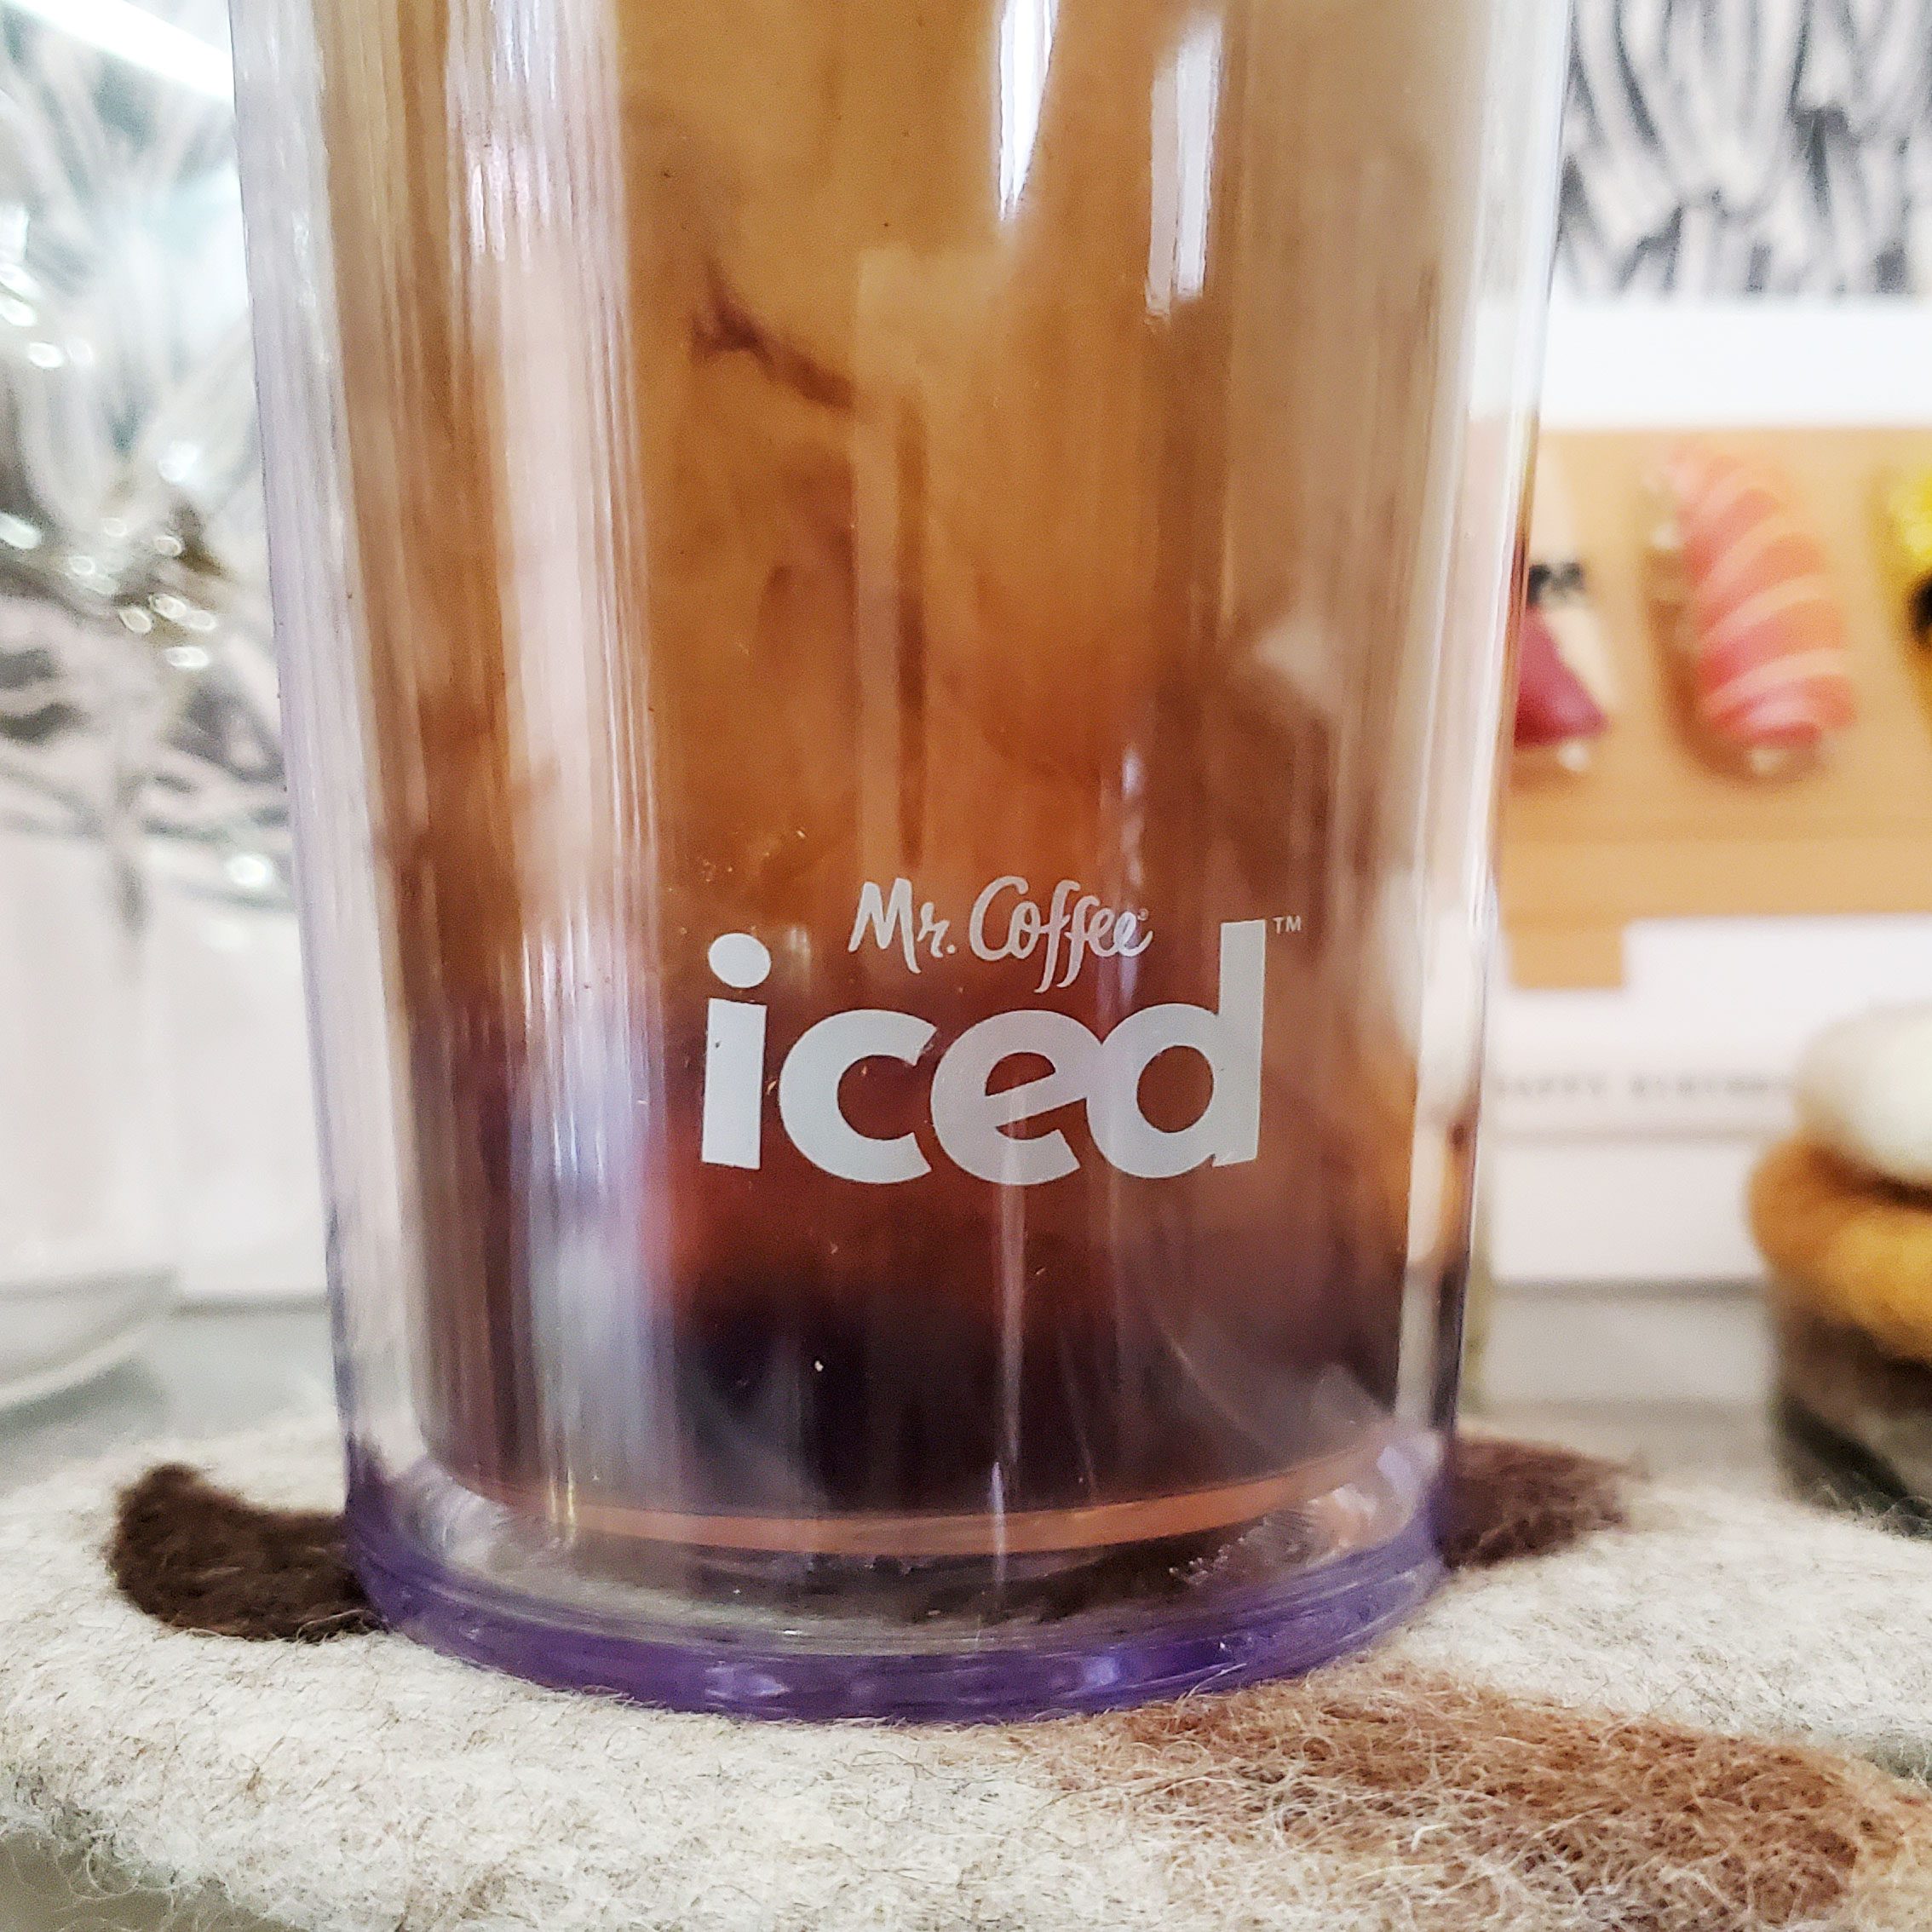 This iced and hot coffee maker by Mr. Coffee has 4-in-1 functionality